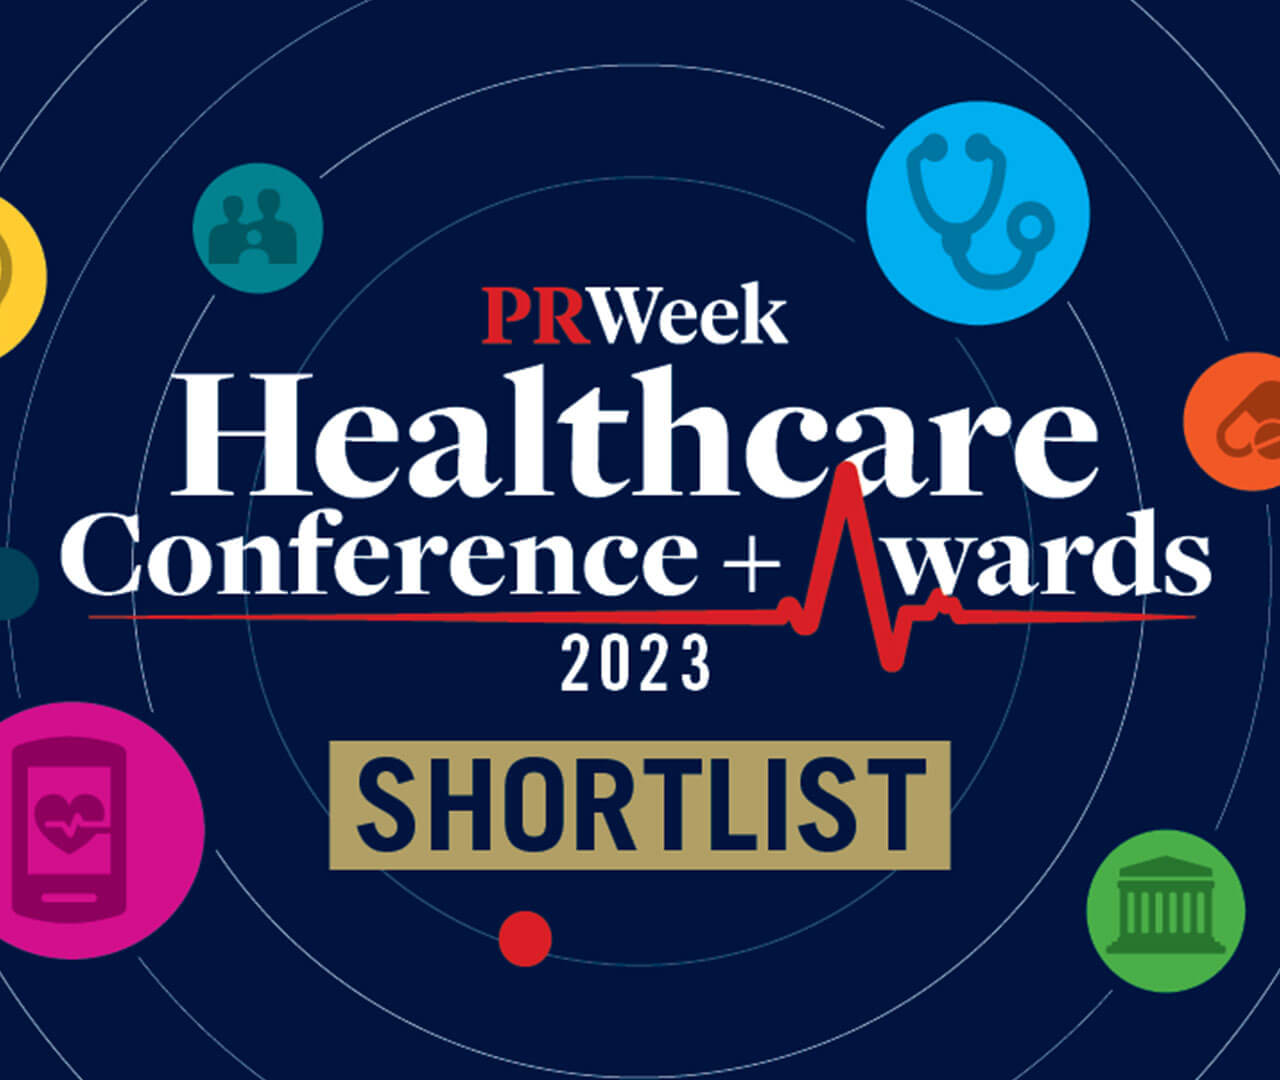 For the Second Consecutive Year, Coyne PR is Nominated for the Best Healthcare Practice in the Country